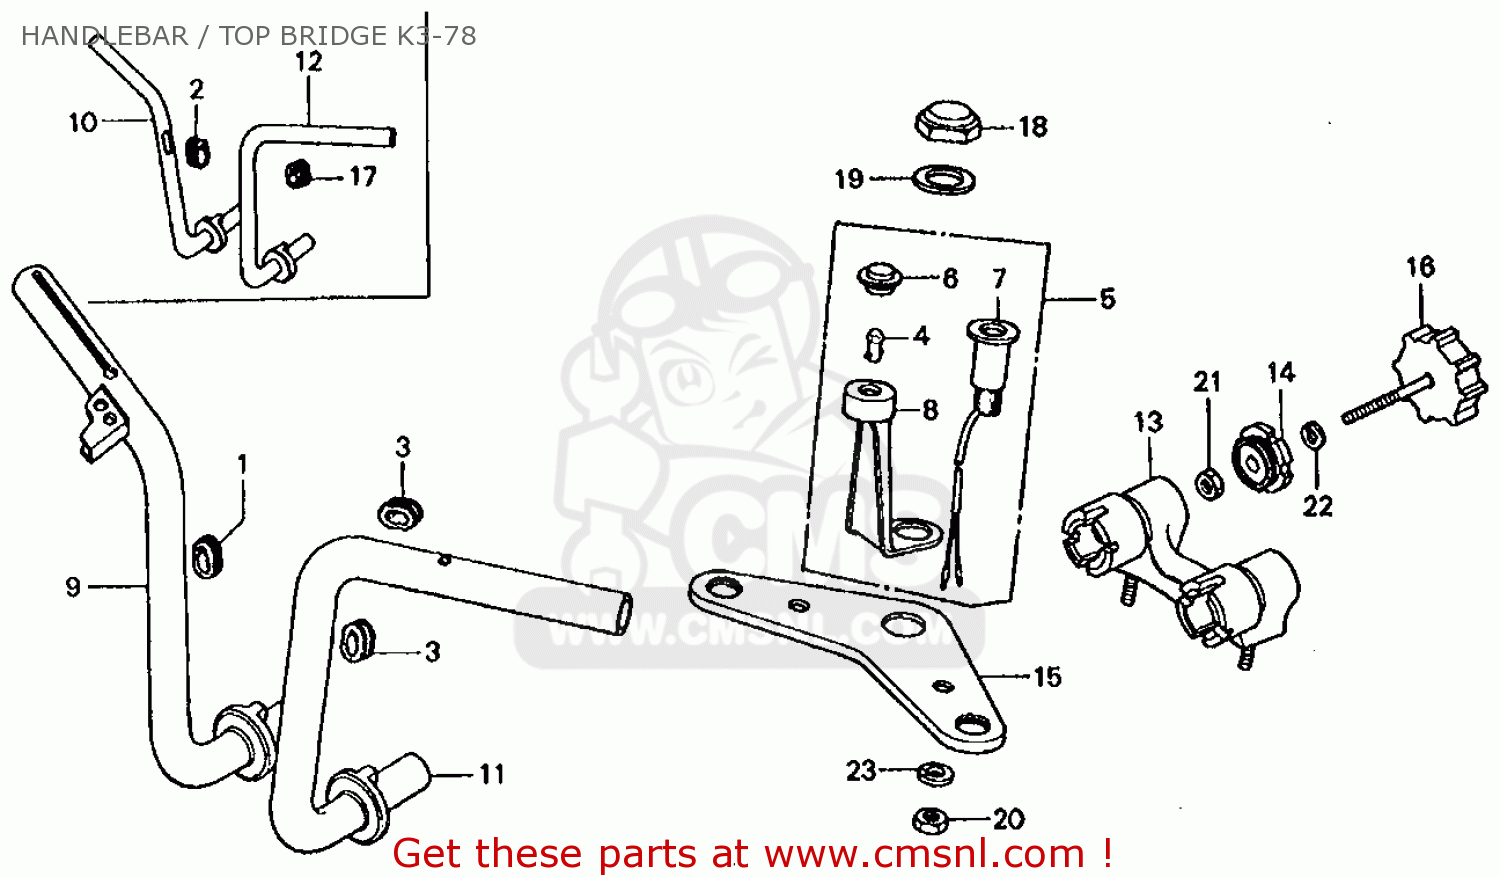 Honda Ct70 Wiring Diagram Images | Wiring Collection